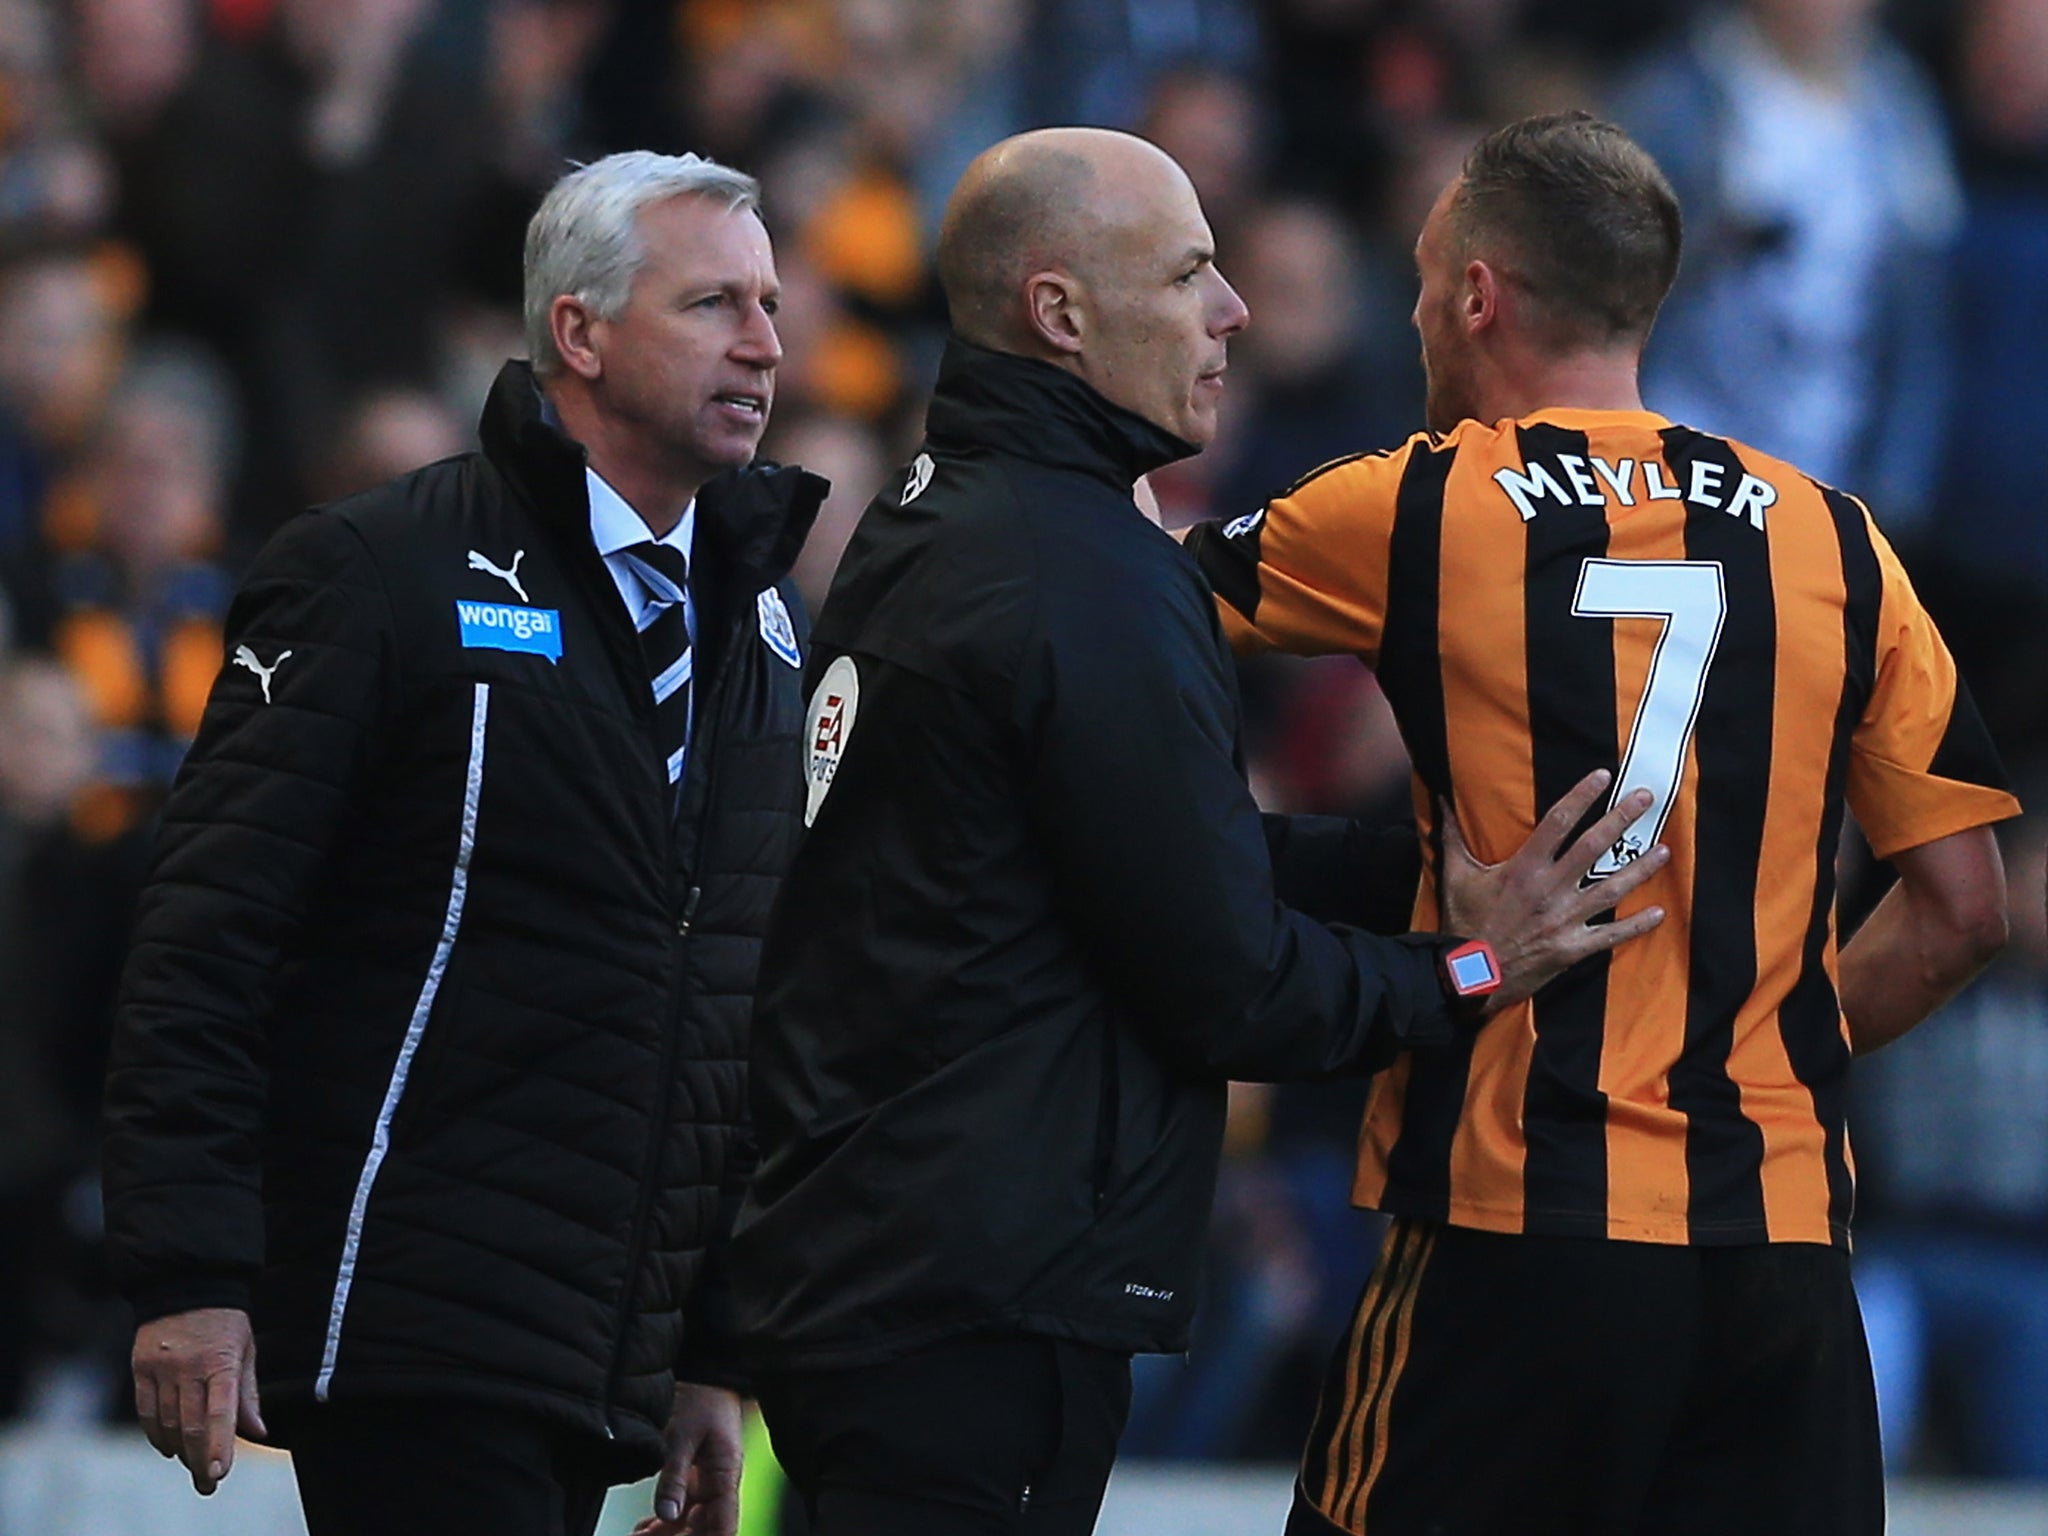 Alan Pardew (left) was involved in an ugly confrontation with Hull's David Meyler on Saturday